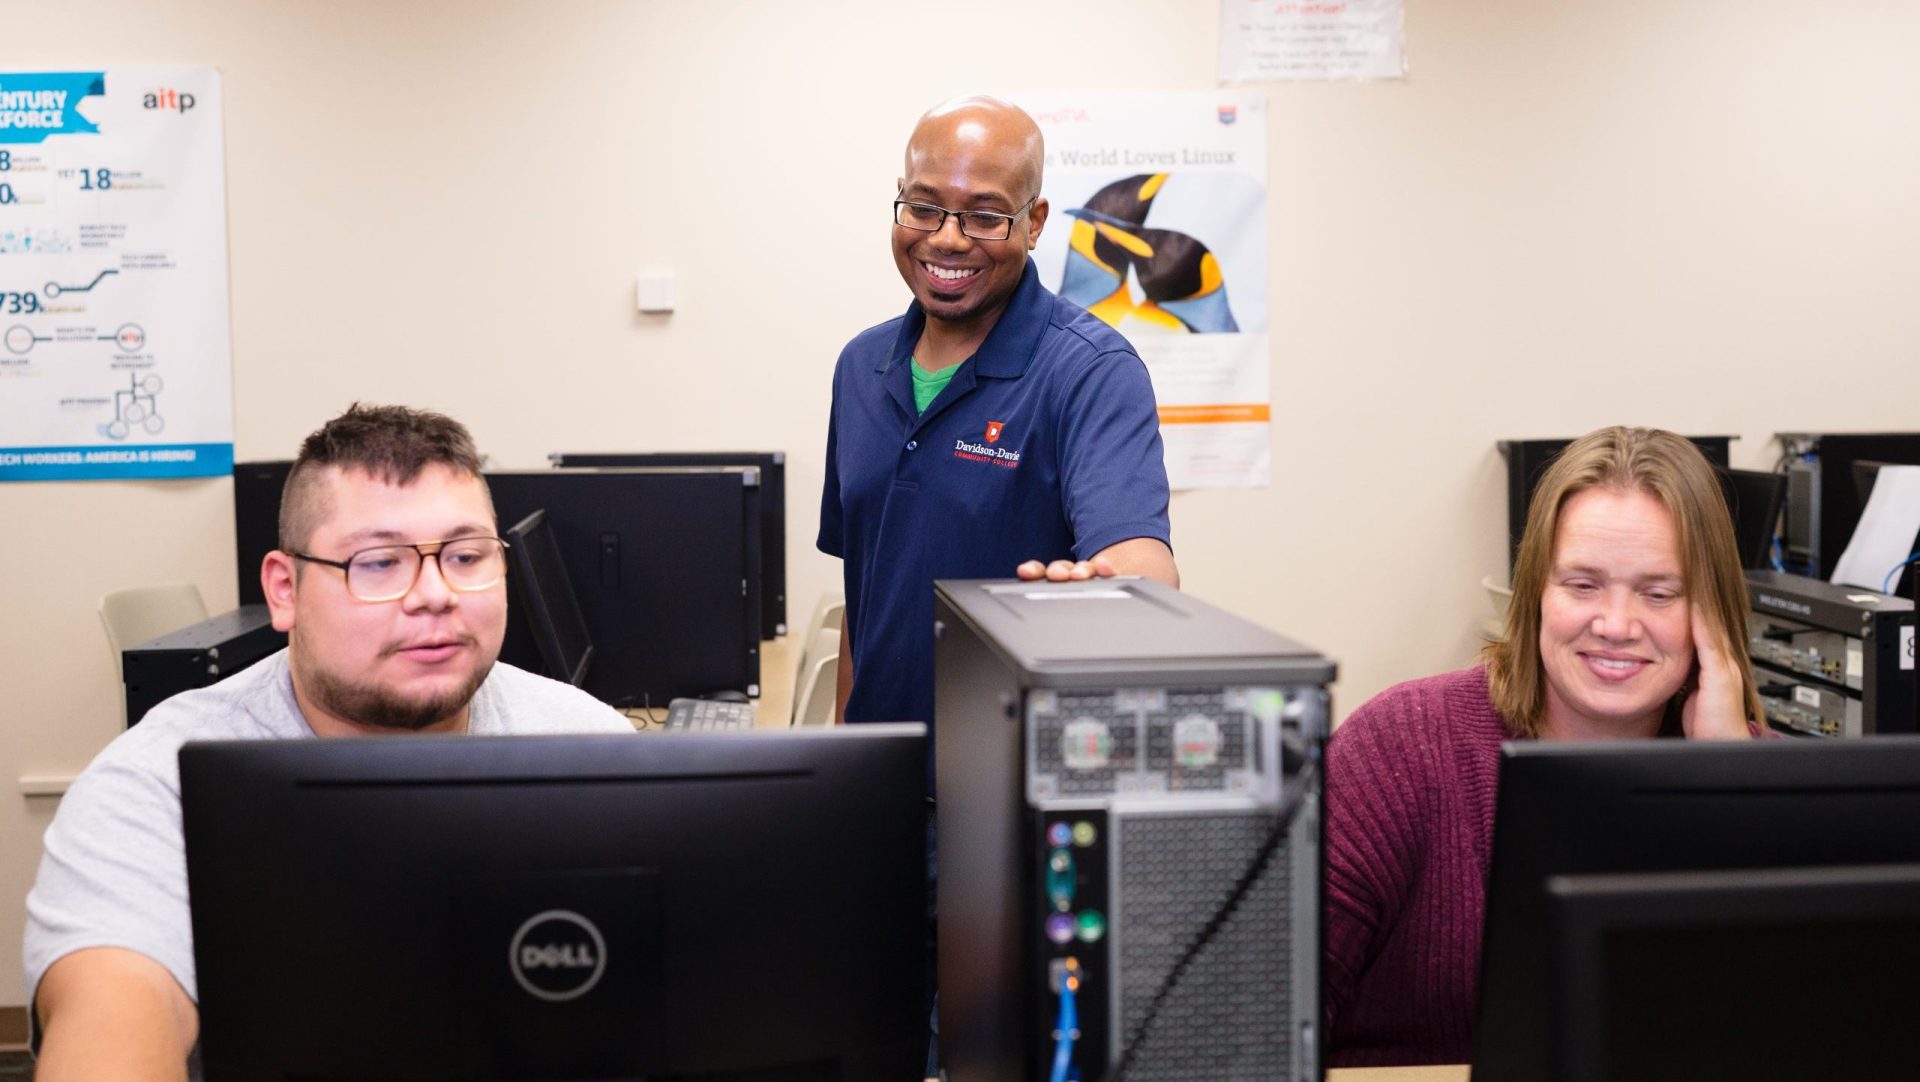 Information Technology Instructor helps two students at computers